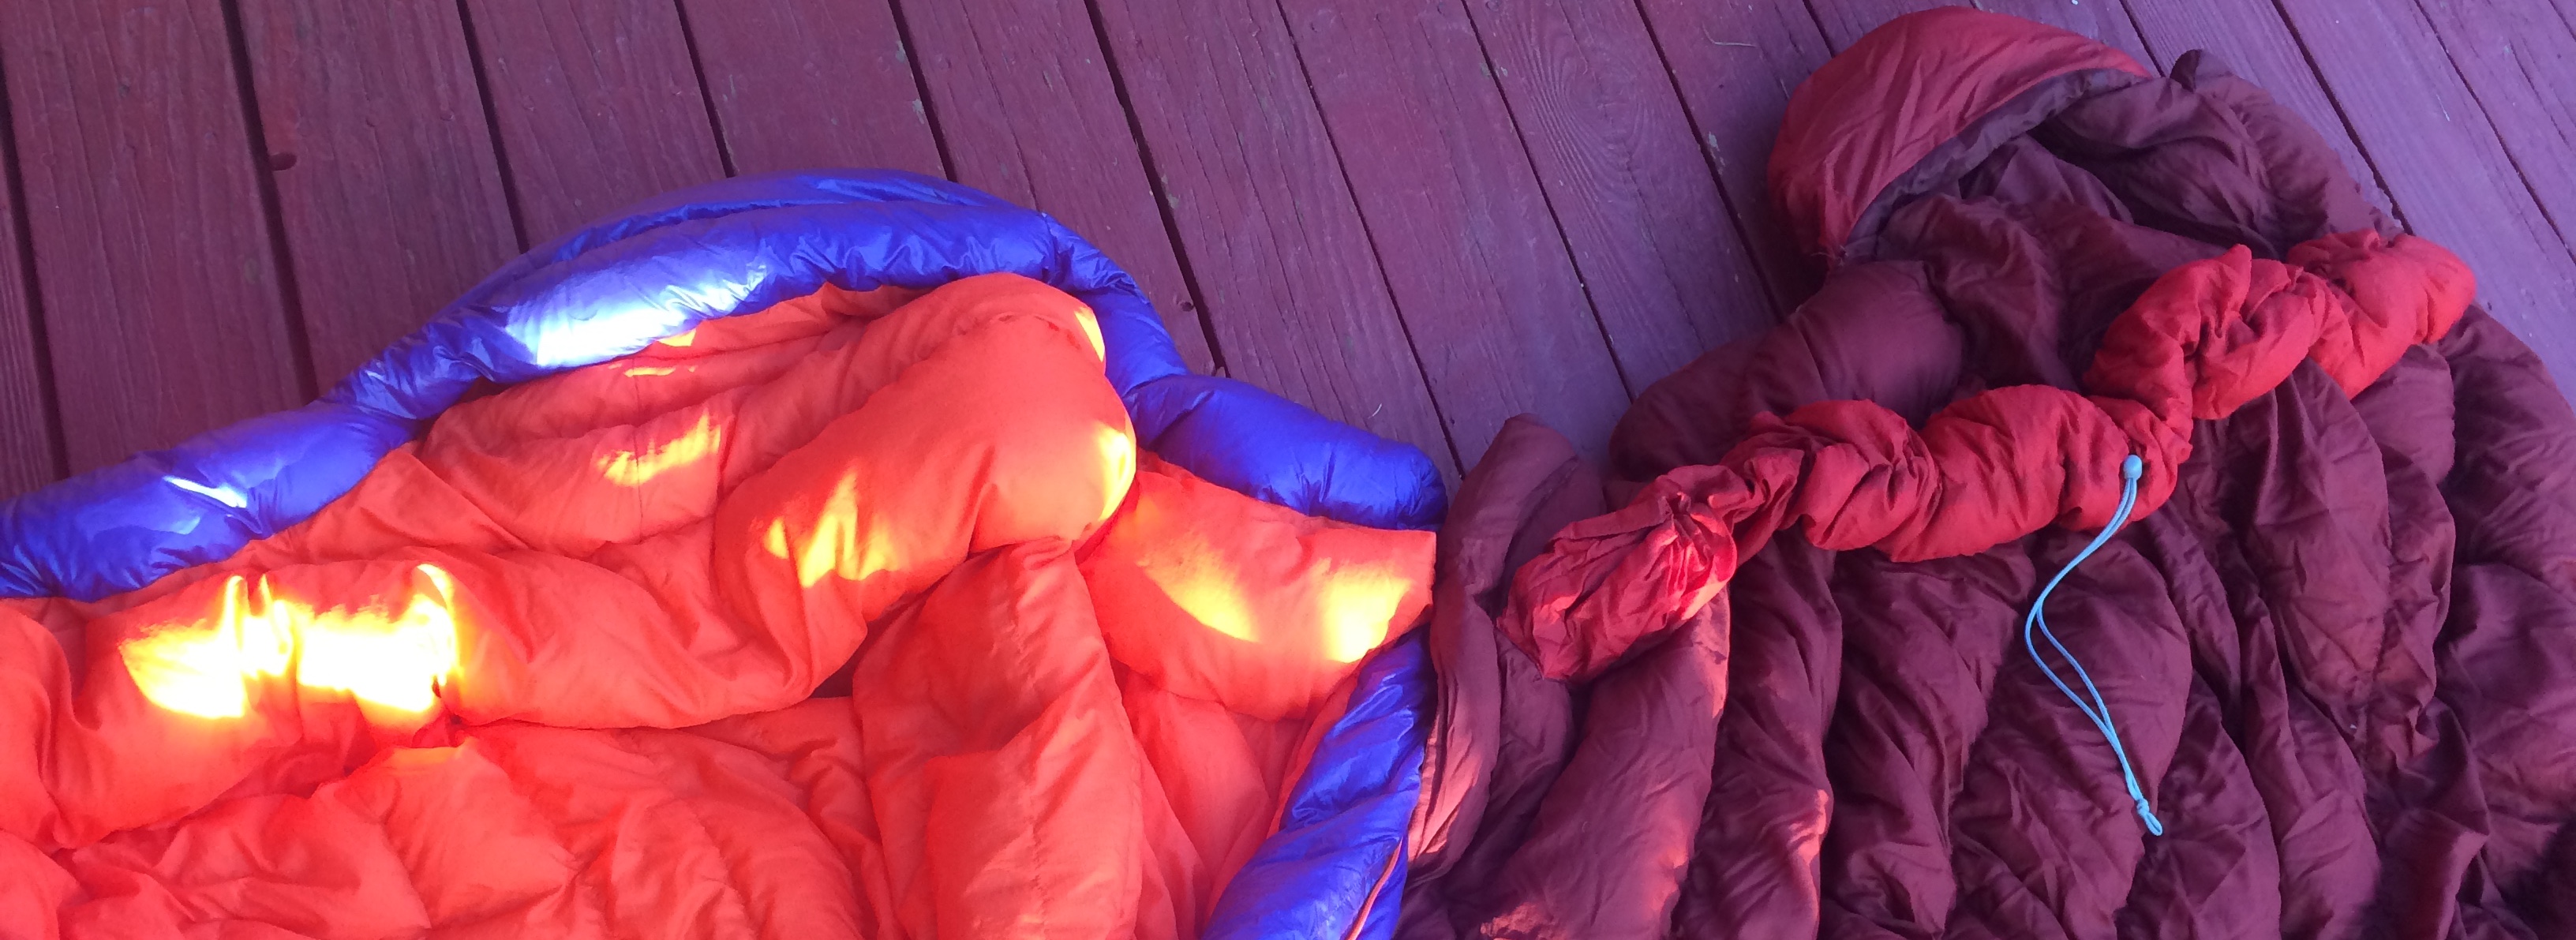 The Patagonia 19-degree bag (left) has a non-cinchable baffle at the neck level, while the Montbell Down Hugger zero-degree bag (right) has a cinchable neck. The sleeping bags in the 15- to 20-degree range typically do not have cinchable necks, and this is where warm air can escape and cold air can enter. [Photo] Mike Lewis collection